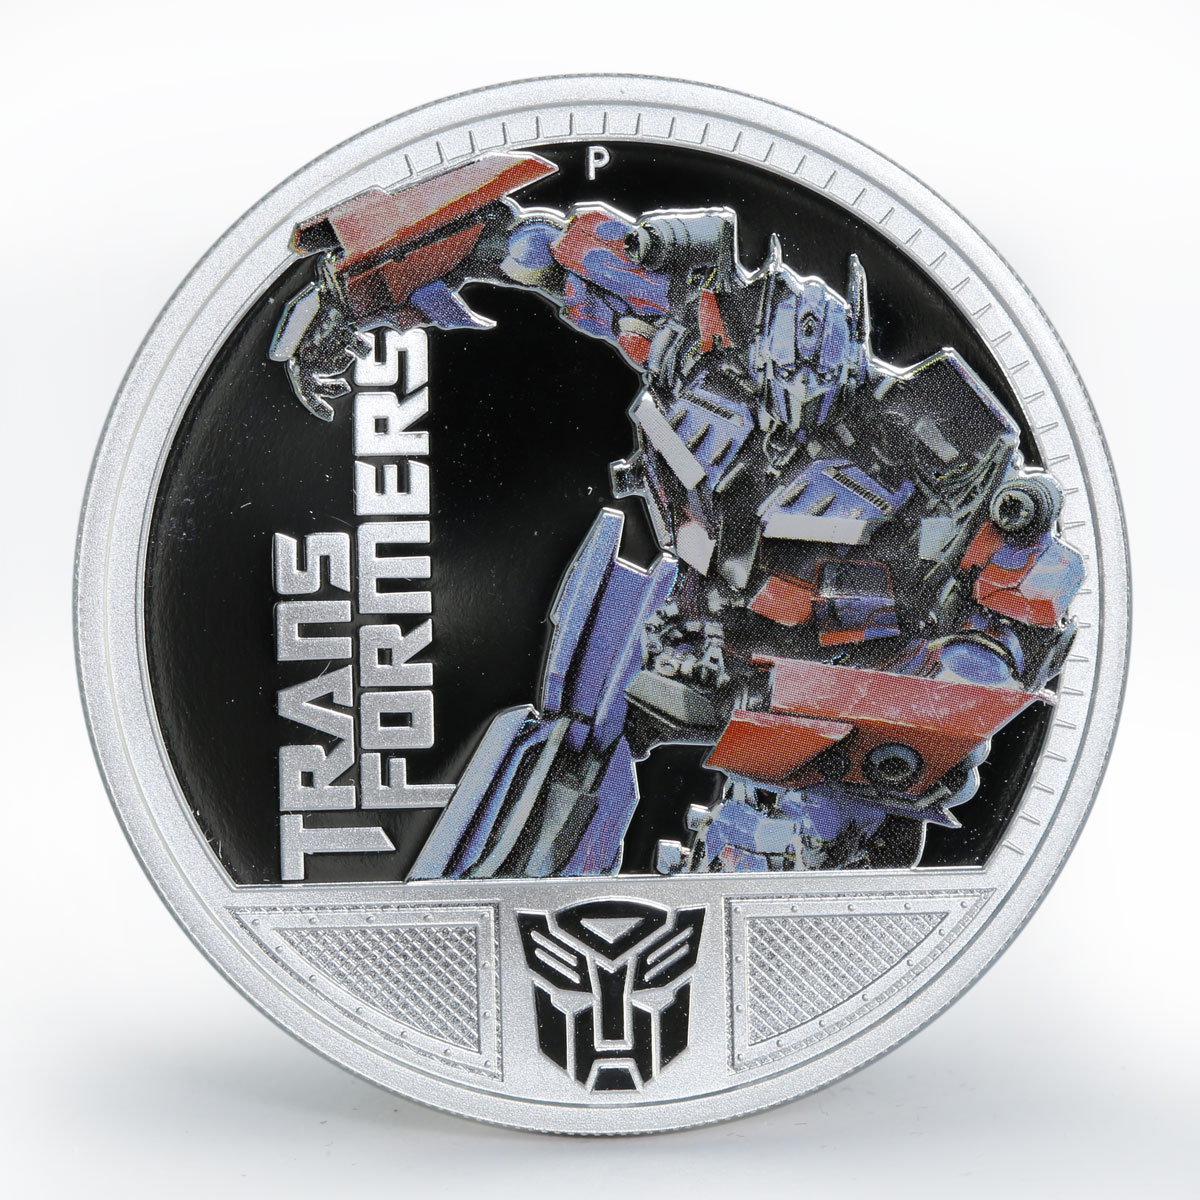 Tuvalu 1 dollar Transformers Optimus Prime colored proof silver coin 2009